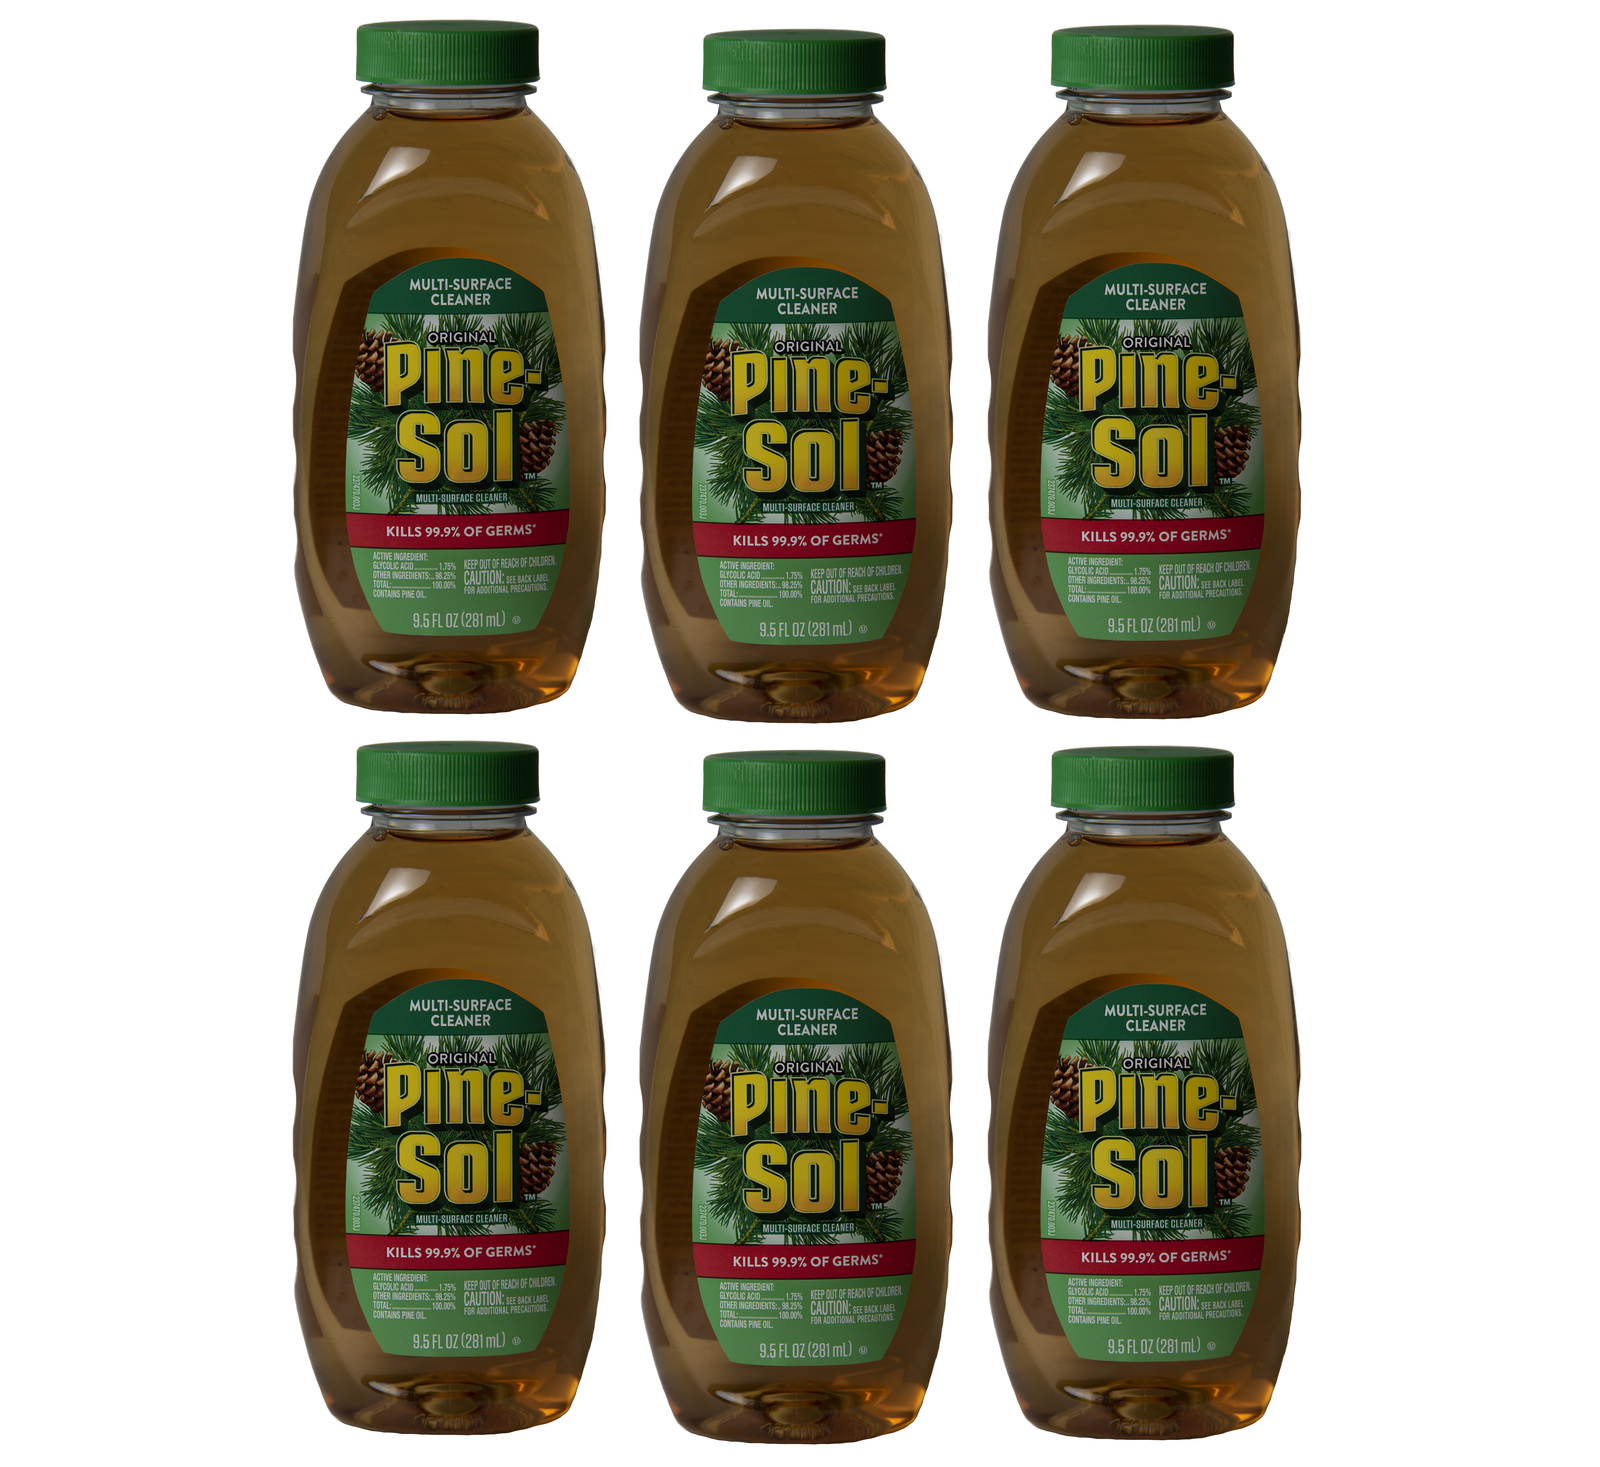 Primary image for Pine Sol Multi-Surface Cleaner, Original, 9.5 fl oz, 6-PACK, LOT